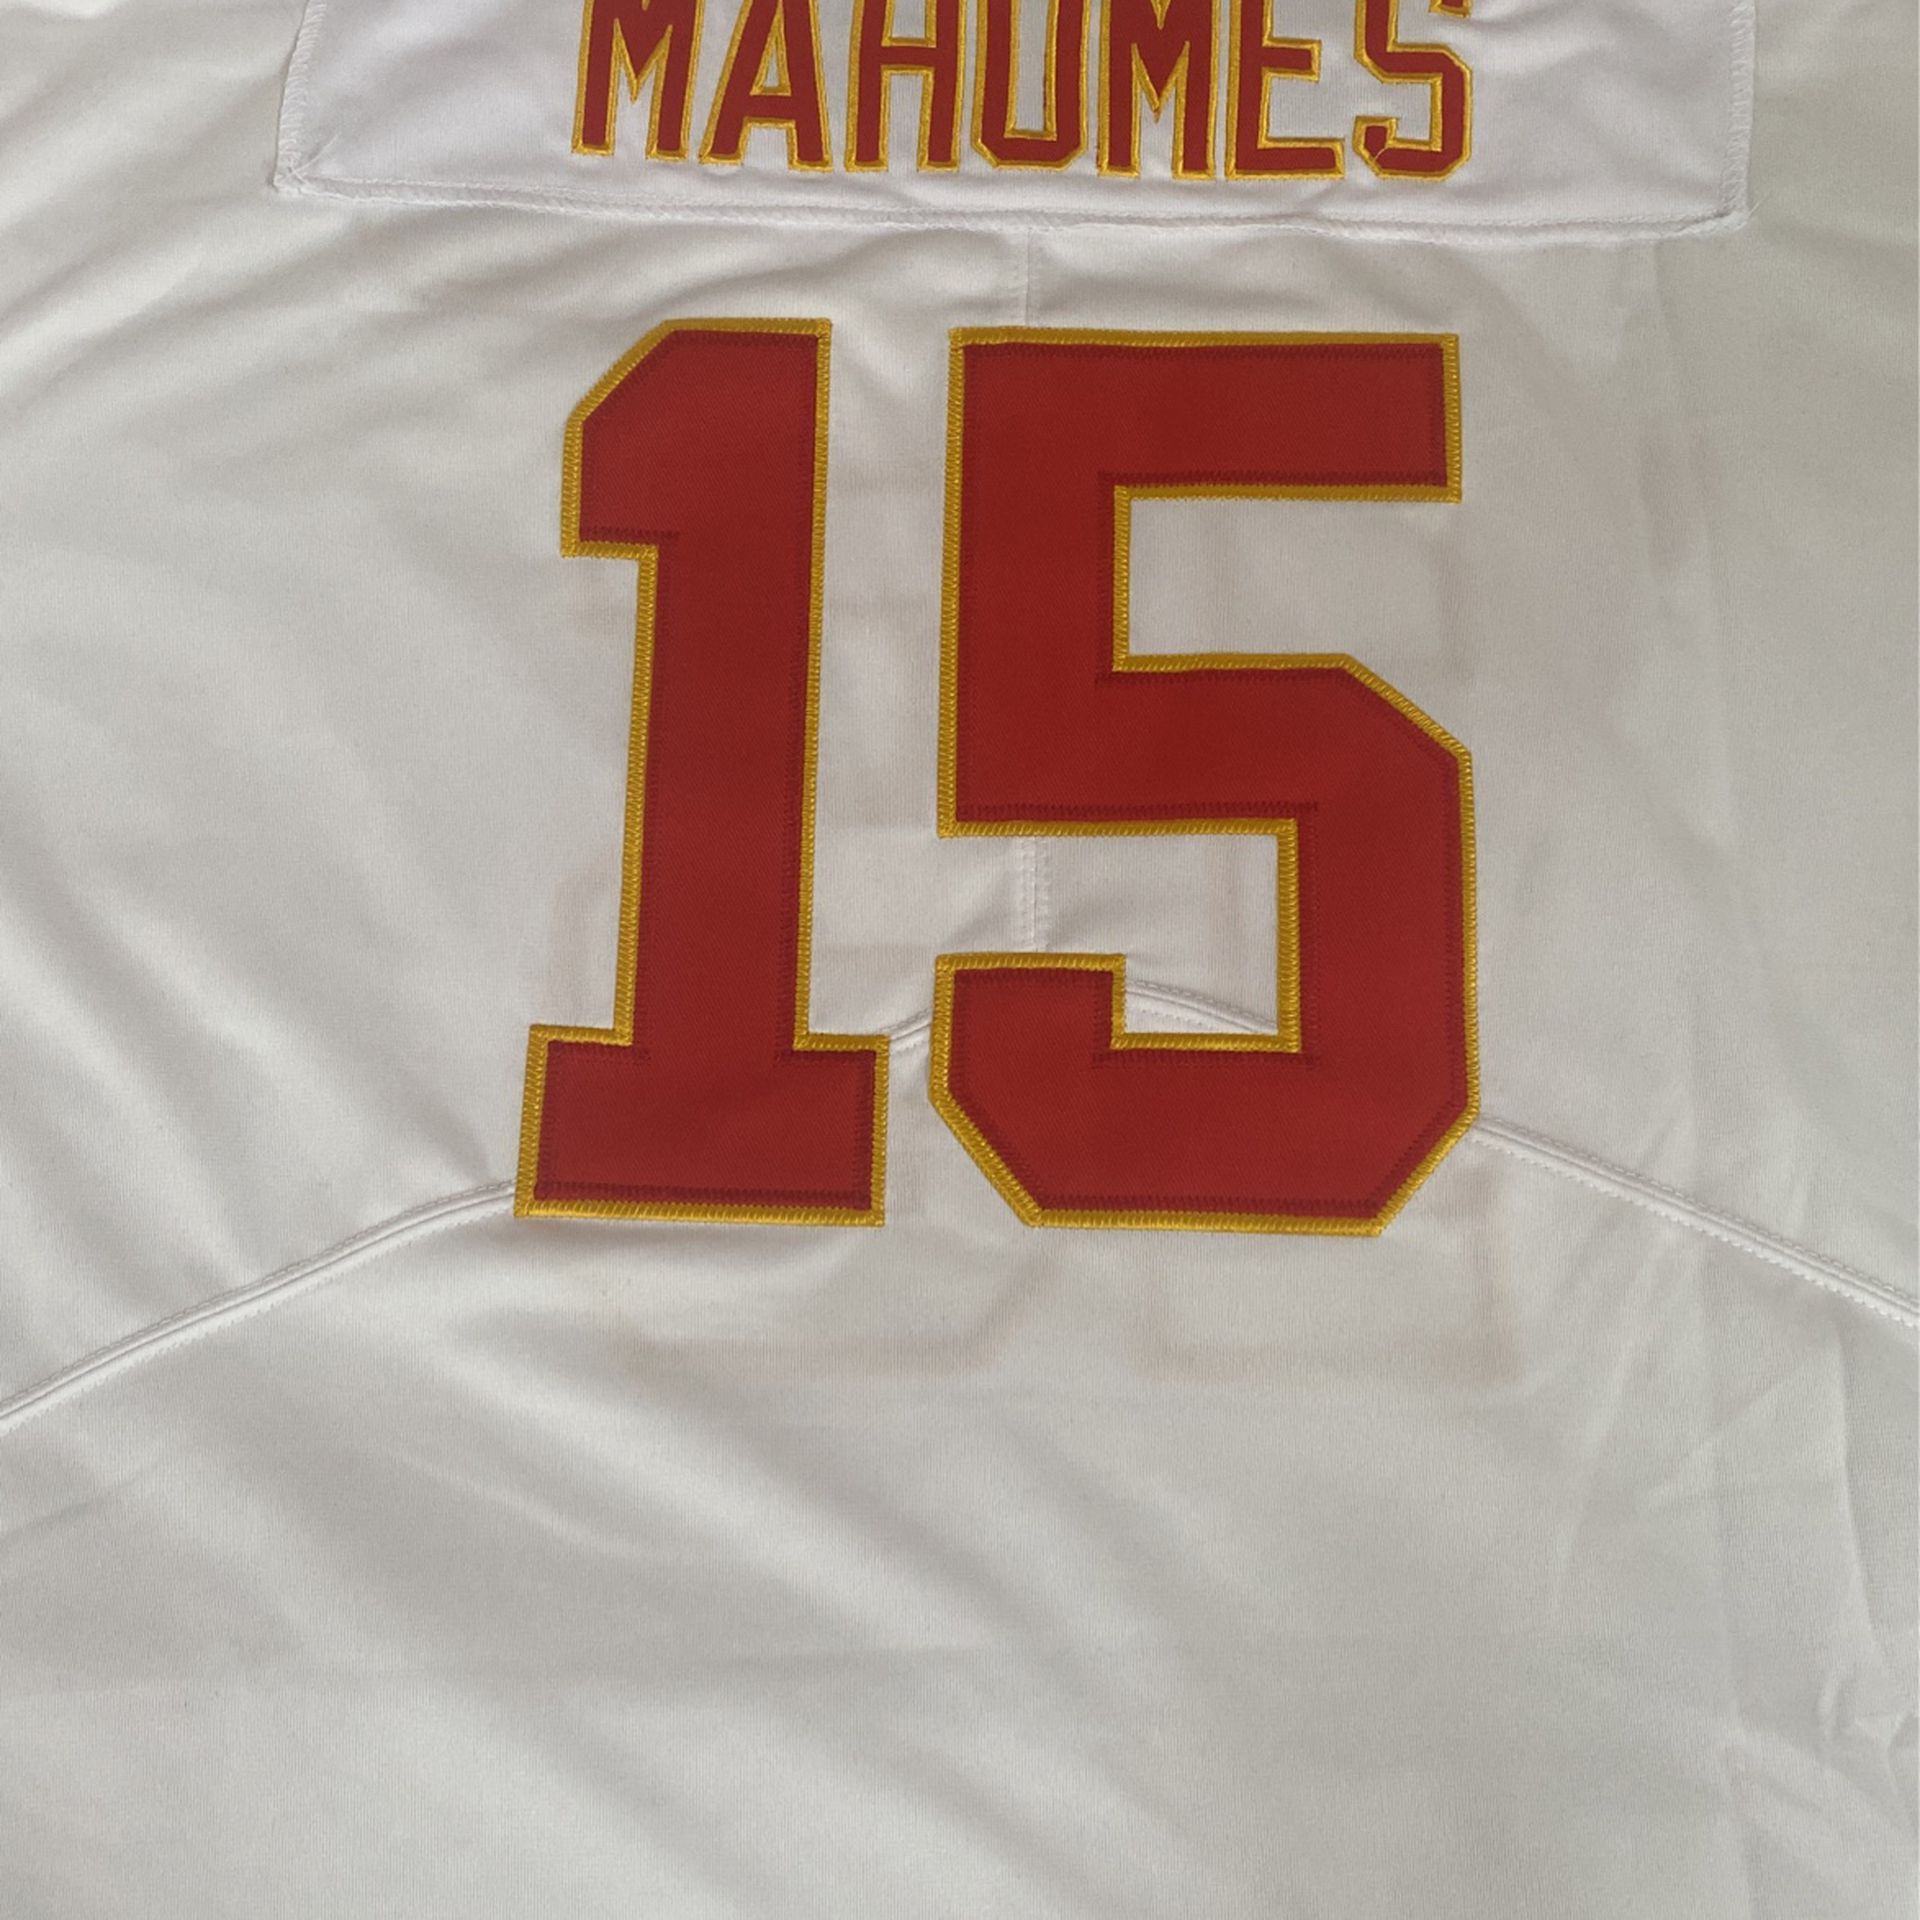 NFL Chiefs Mahomes Adult 2XL Jersey $50